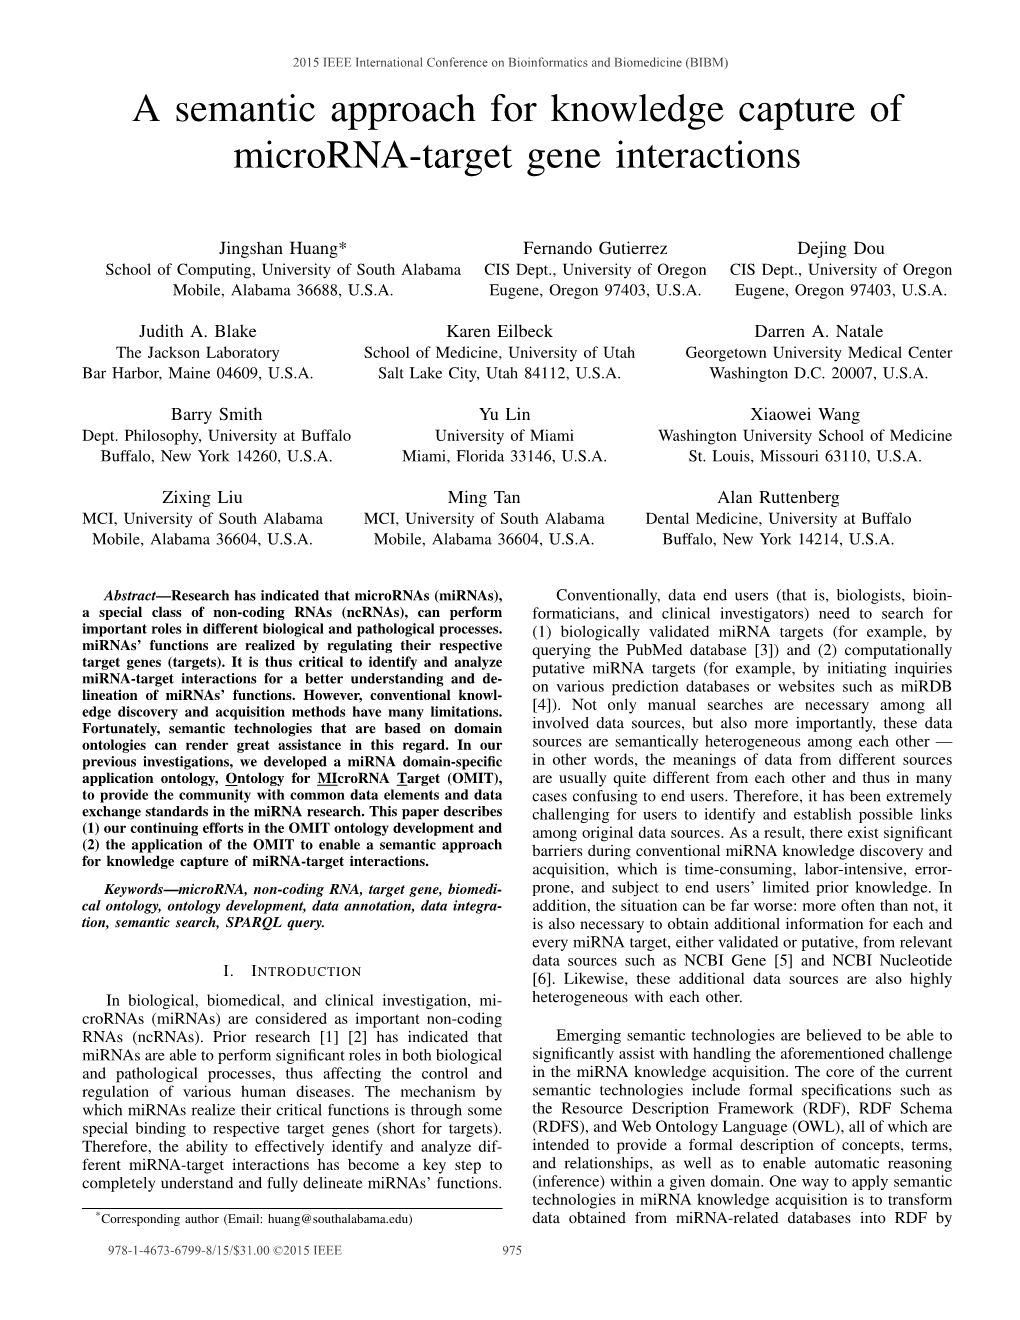 A Semantic Approach for Knowledge Capture of Microrna-Target Gene Interactions